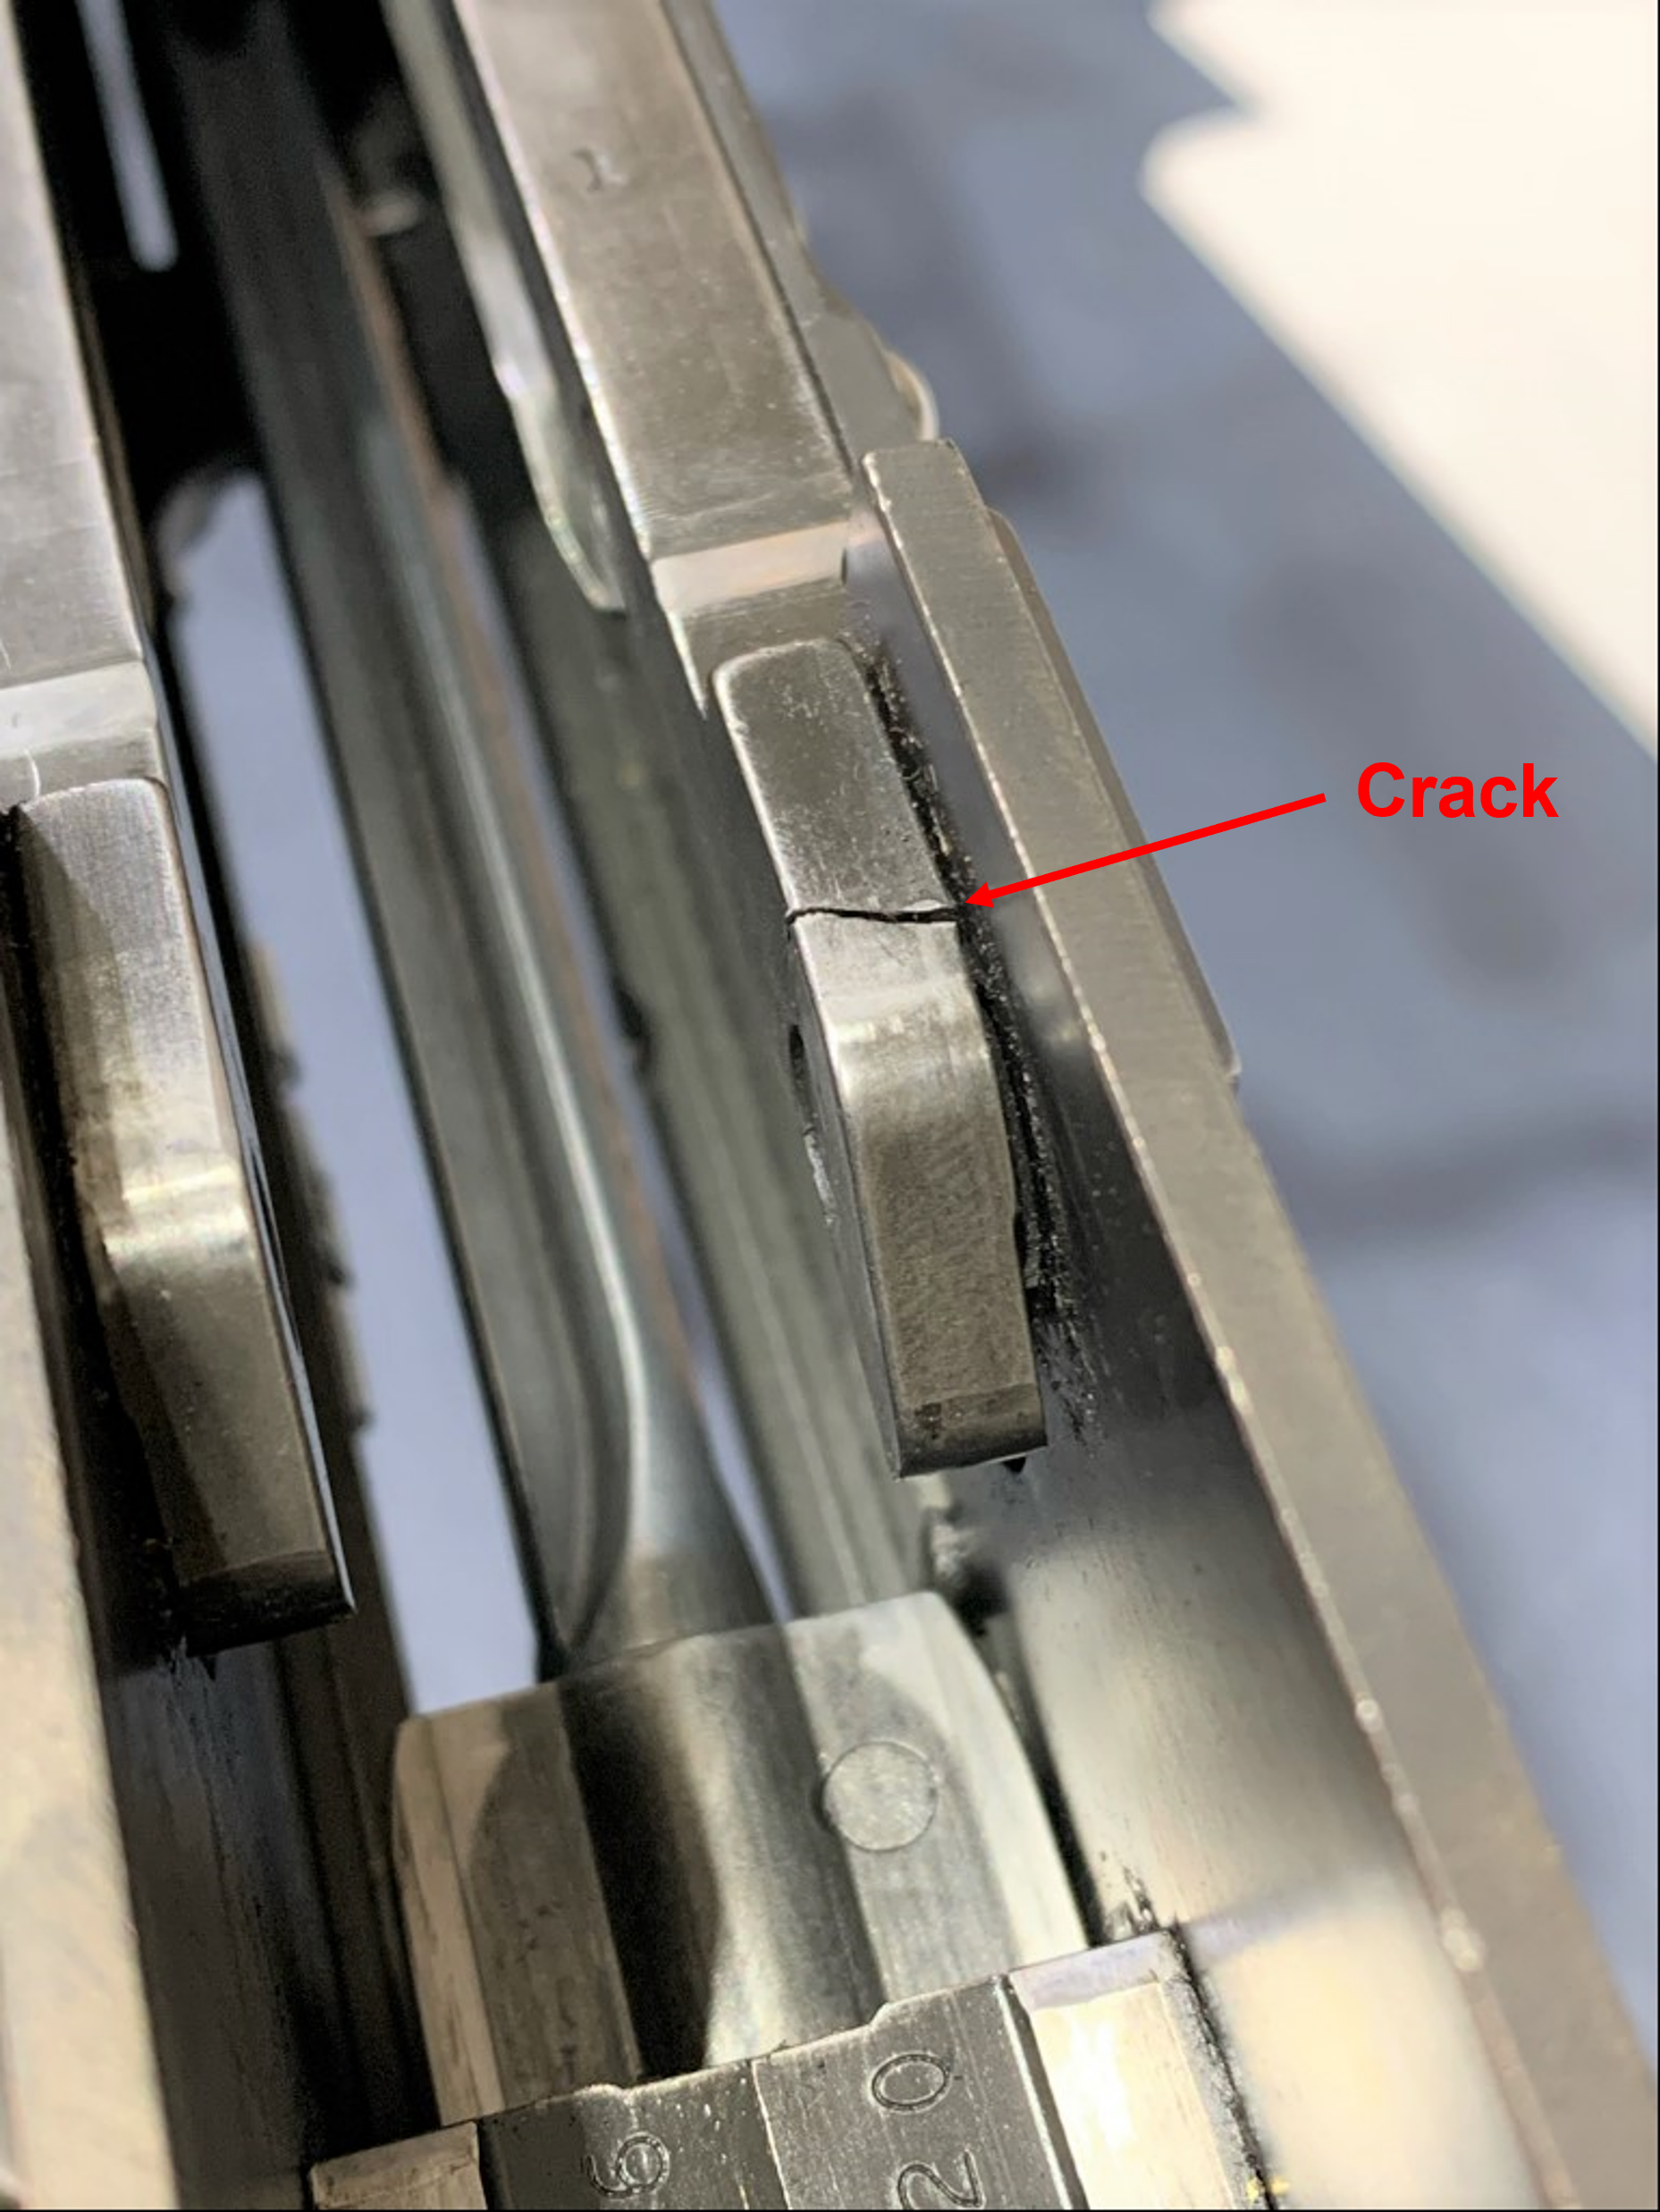 Cracked receiver bolt guide rail